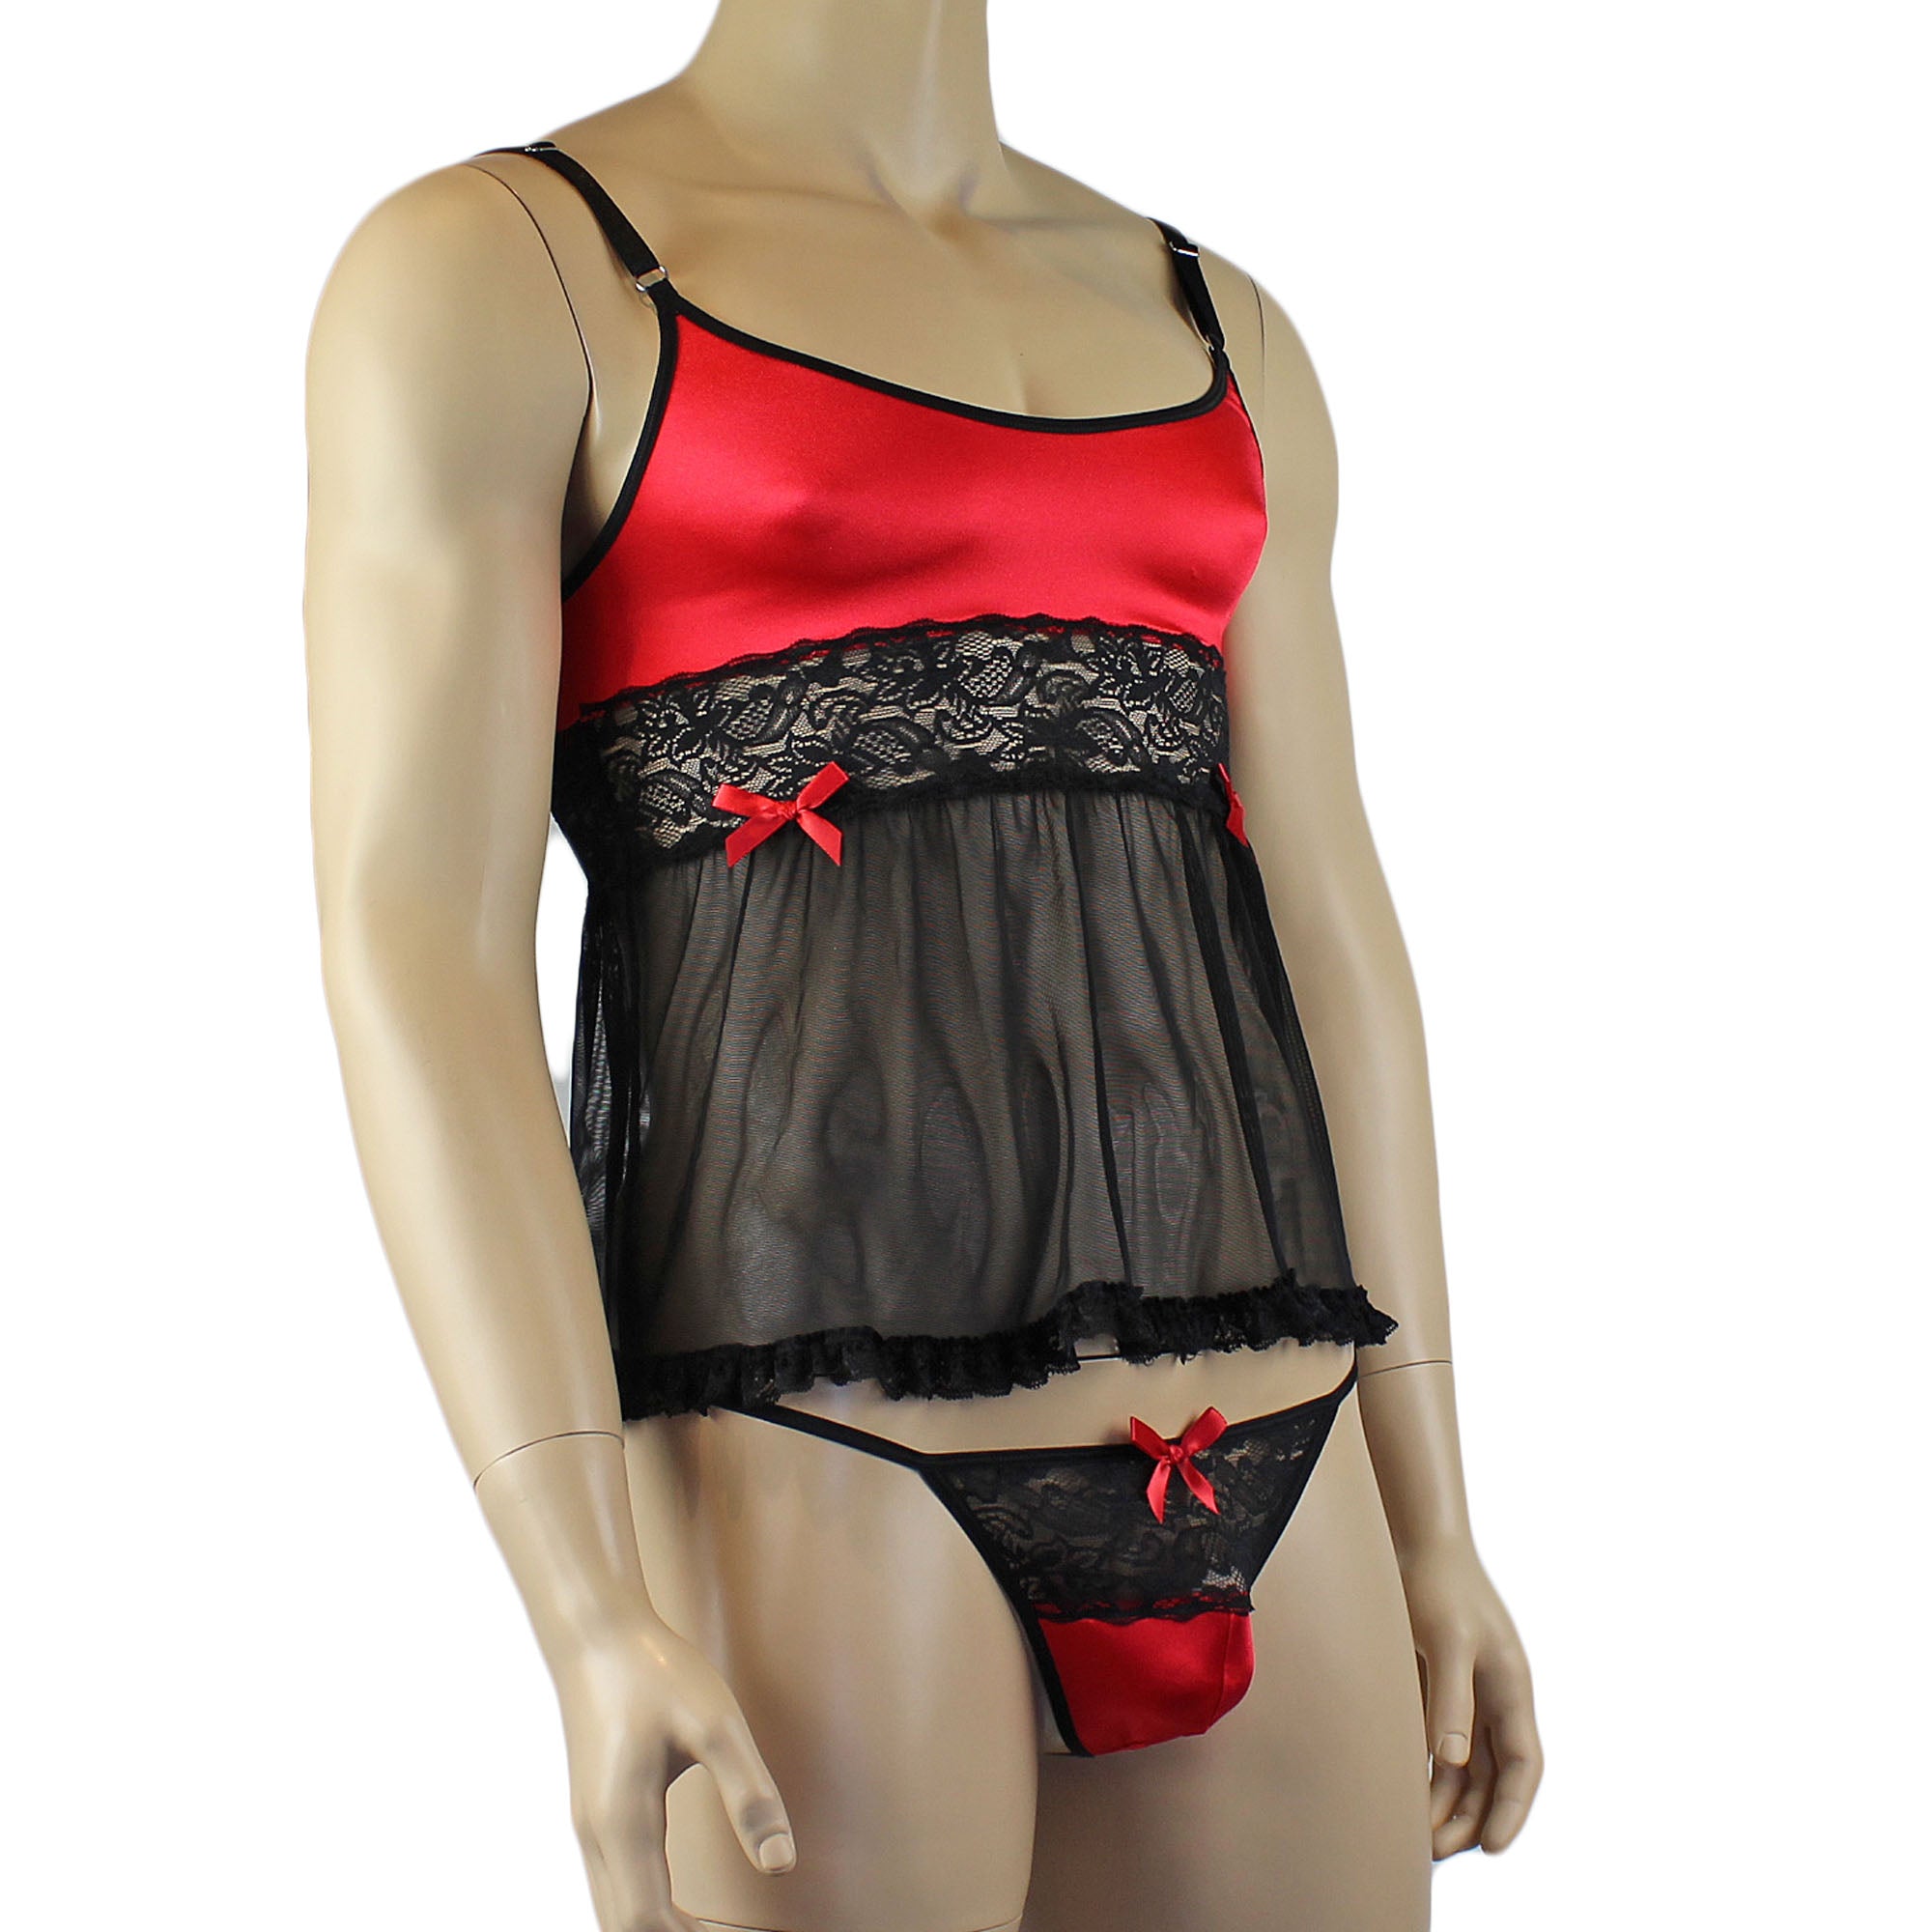 Mens Joanne Mini Babydoll Camisole & G string - Sizes up to 3XL Red and Black Lace